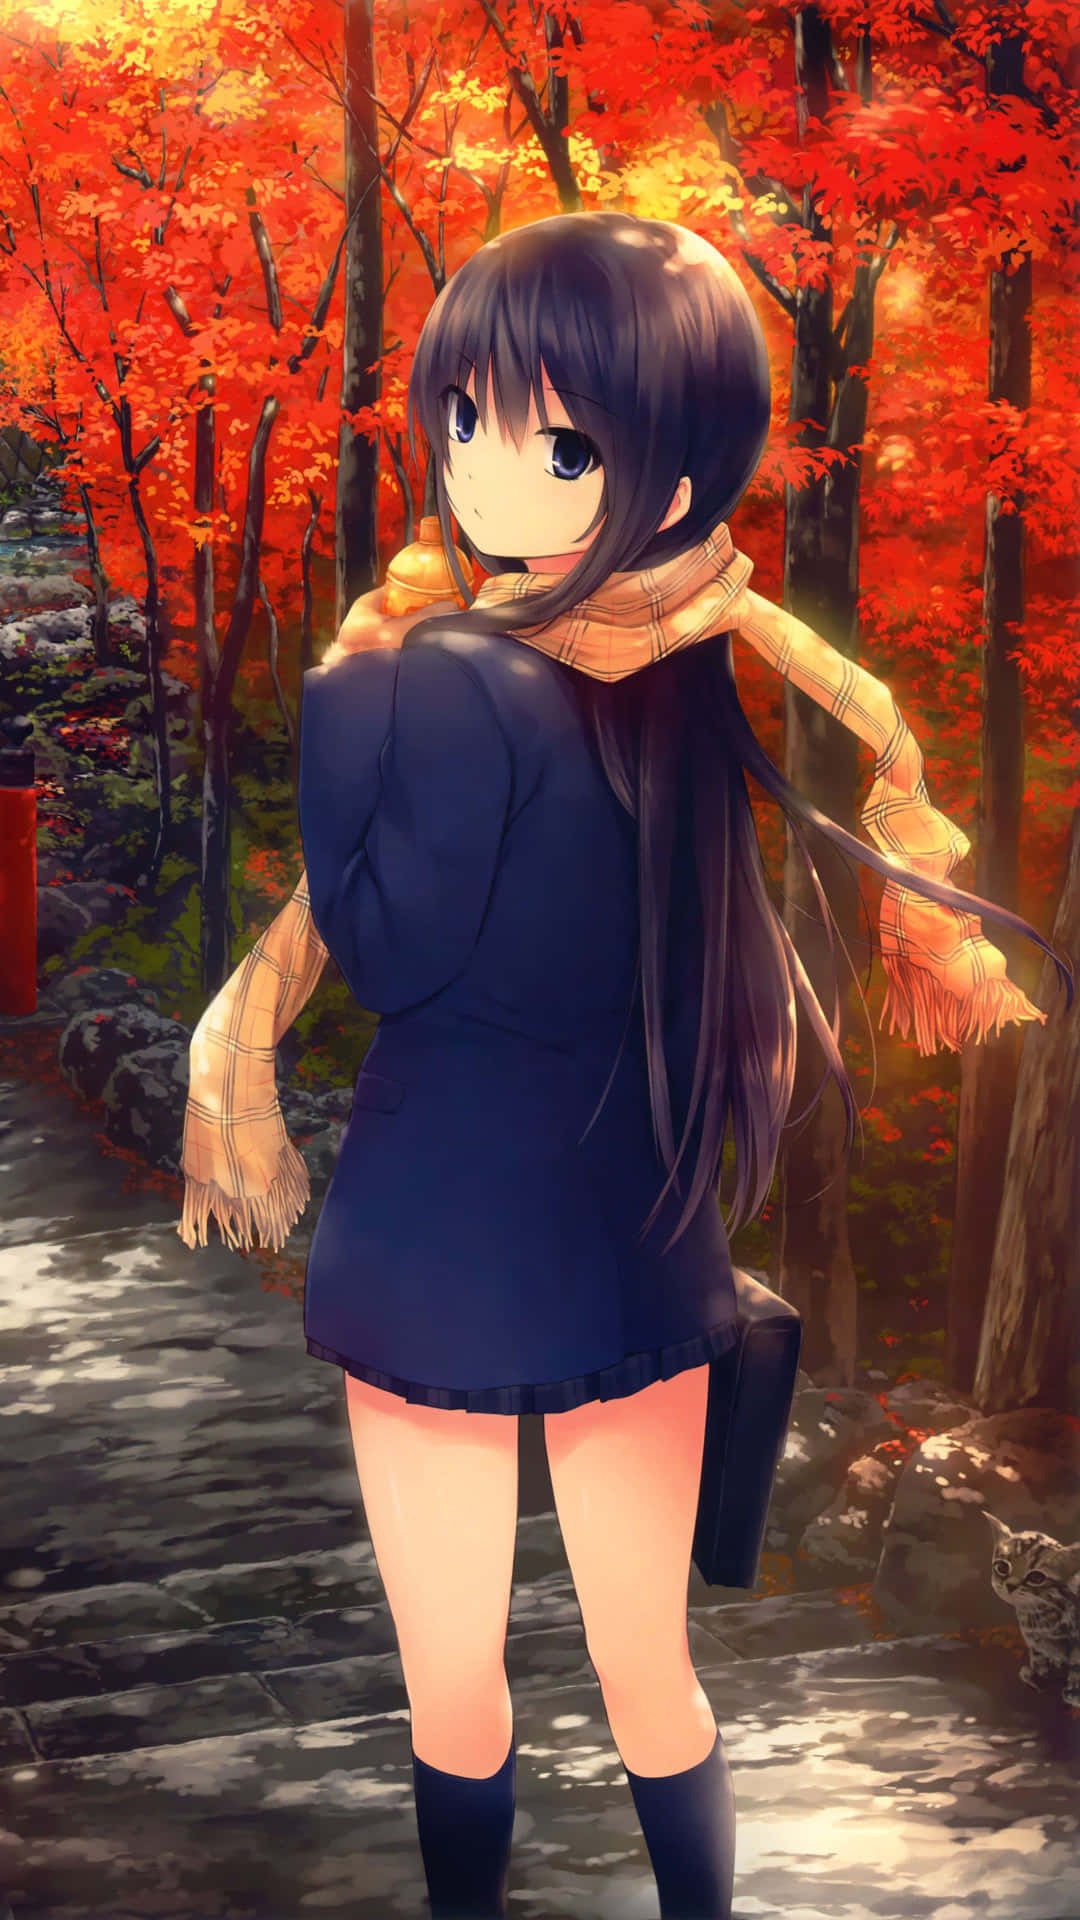 402032 anime anime girl fall water Asia wallpaper download 1688x3000   Rare Gallery HD Wallpapers